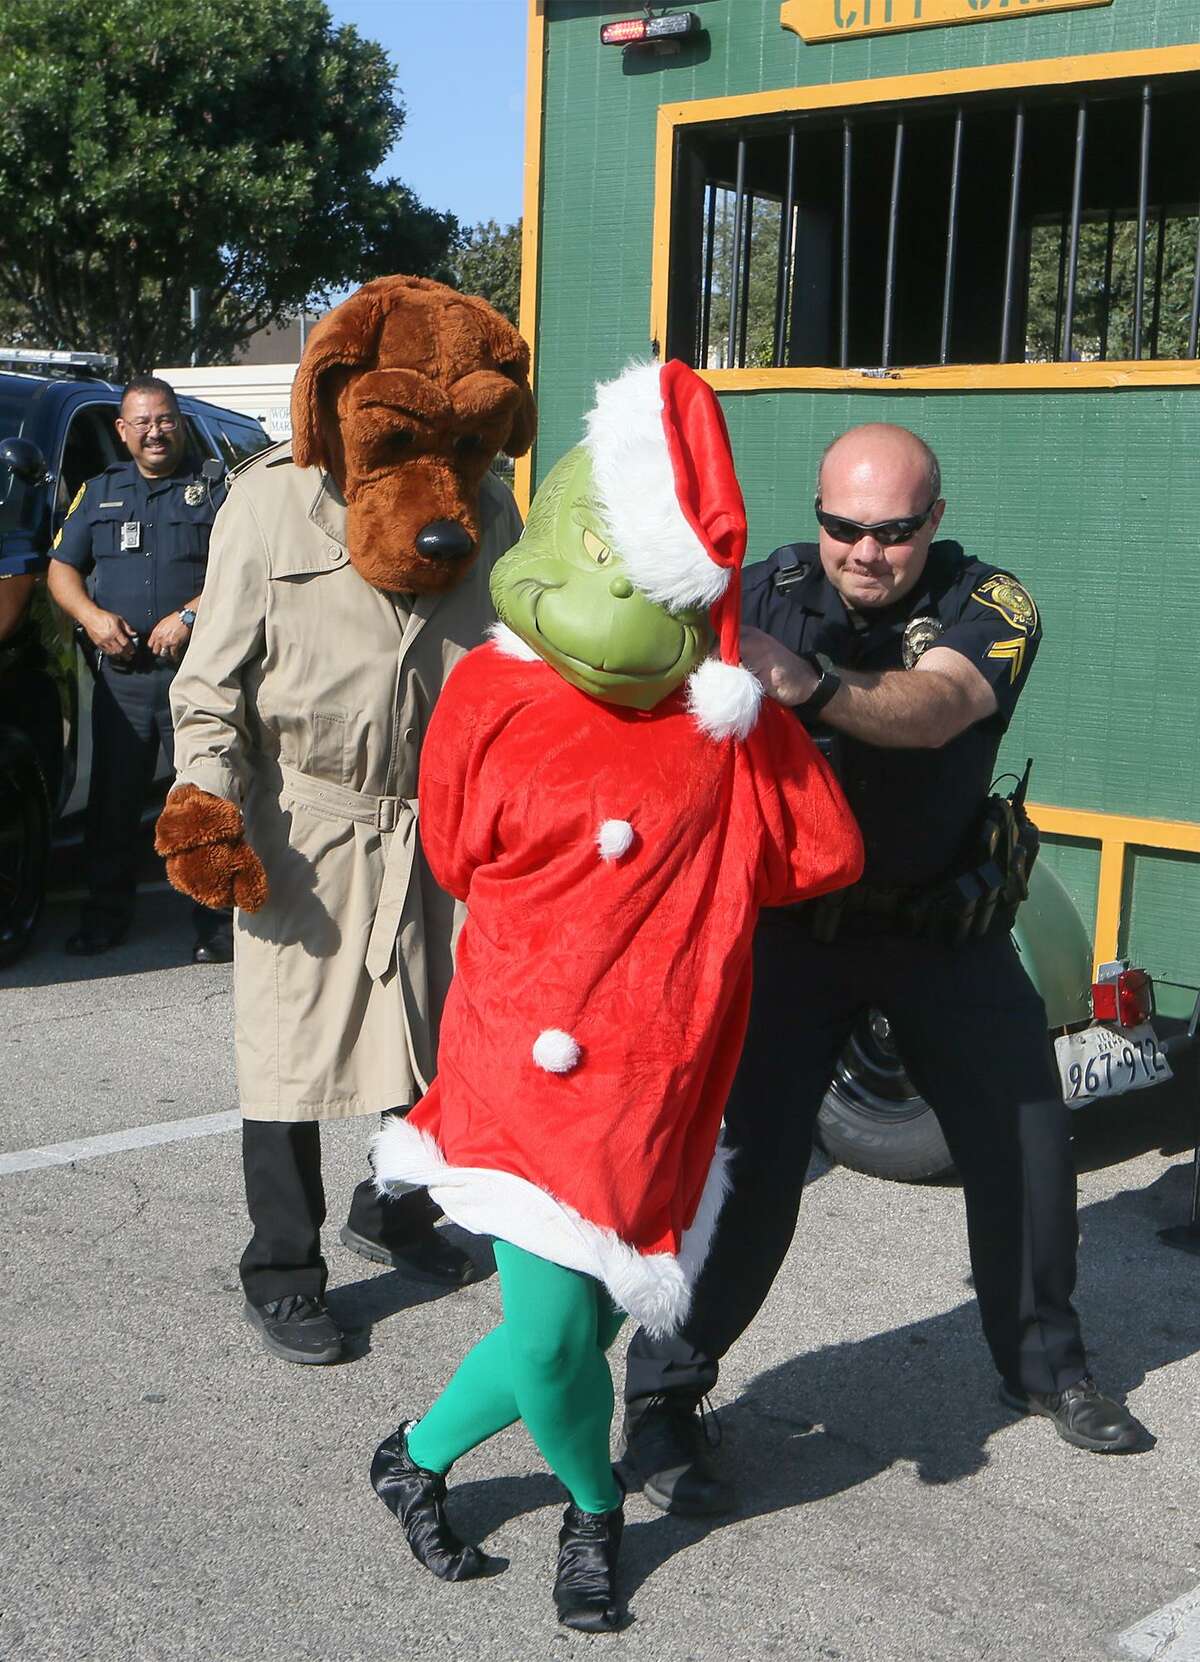 Cpl. William Feldtmose with the Live Oak Police Department arrests the Grinch with the help of McGruff the Crime Dog as police officers from Live Oak, Selma and Universal city kicked off the annual holiday safe shopping season with Operation Grinch 2016 in the Forum Shopping Center parking lot on Friday, Nov. 18, 2016. MARVIN PFEIFFER/ mpfeiffer@express-news.net